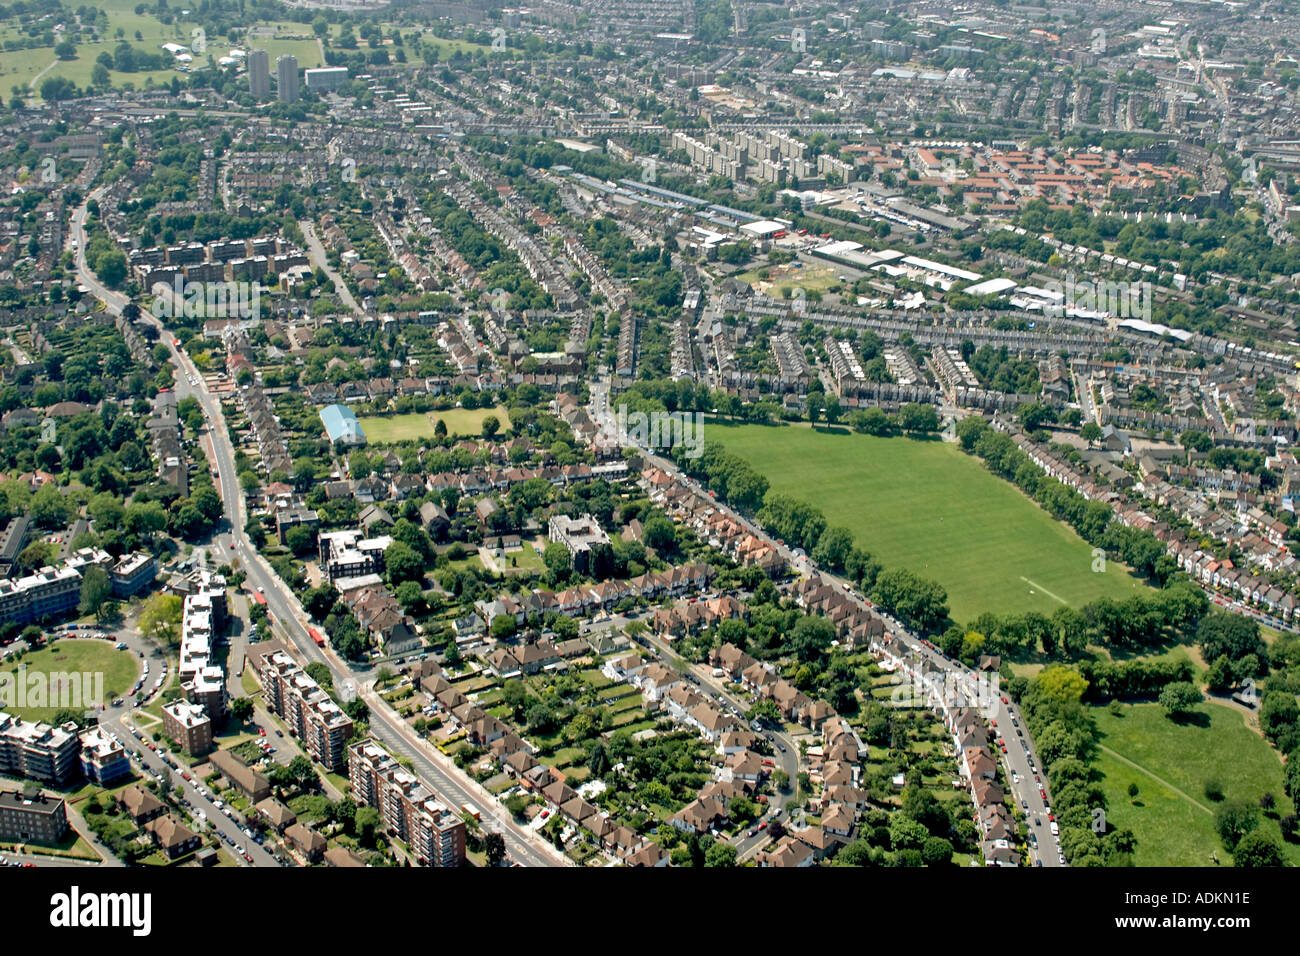 Oblique high level aerial view south west of A 215 and Rusjin Park Camberwell London SE5 SE24 England 2005 Stock Photo